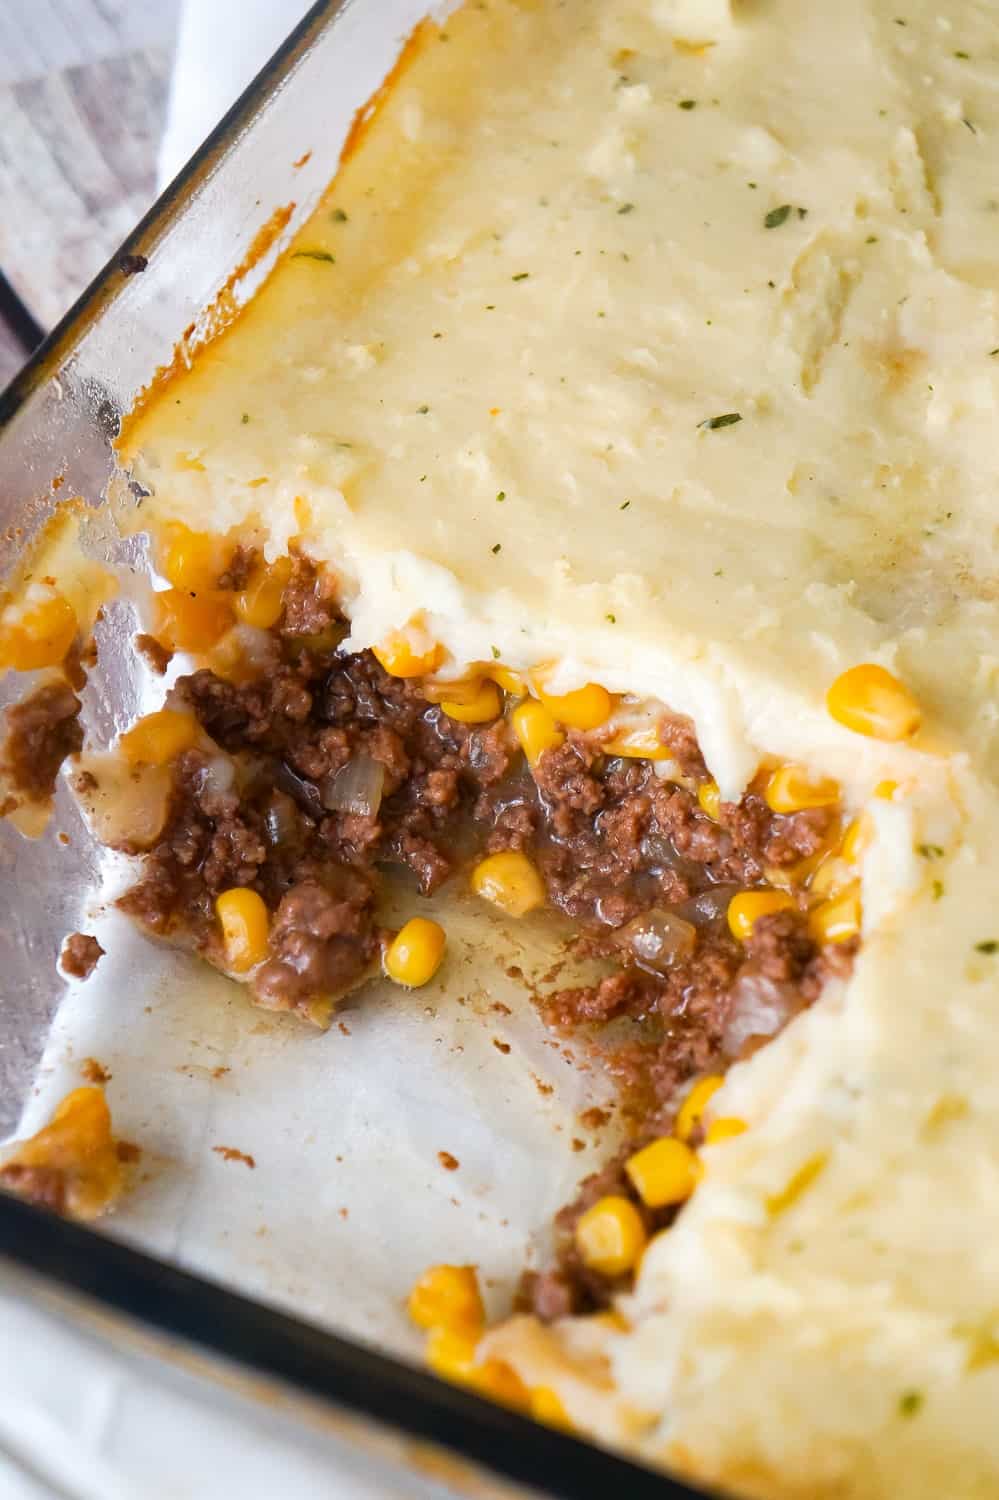 The Best Shepherd's Pie is an easy ground beef dinner recipe. A base of ground beef tossed in brown gravy is topped with corn and creamy mashed potatoes.